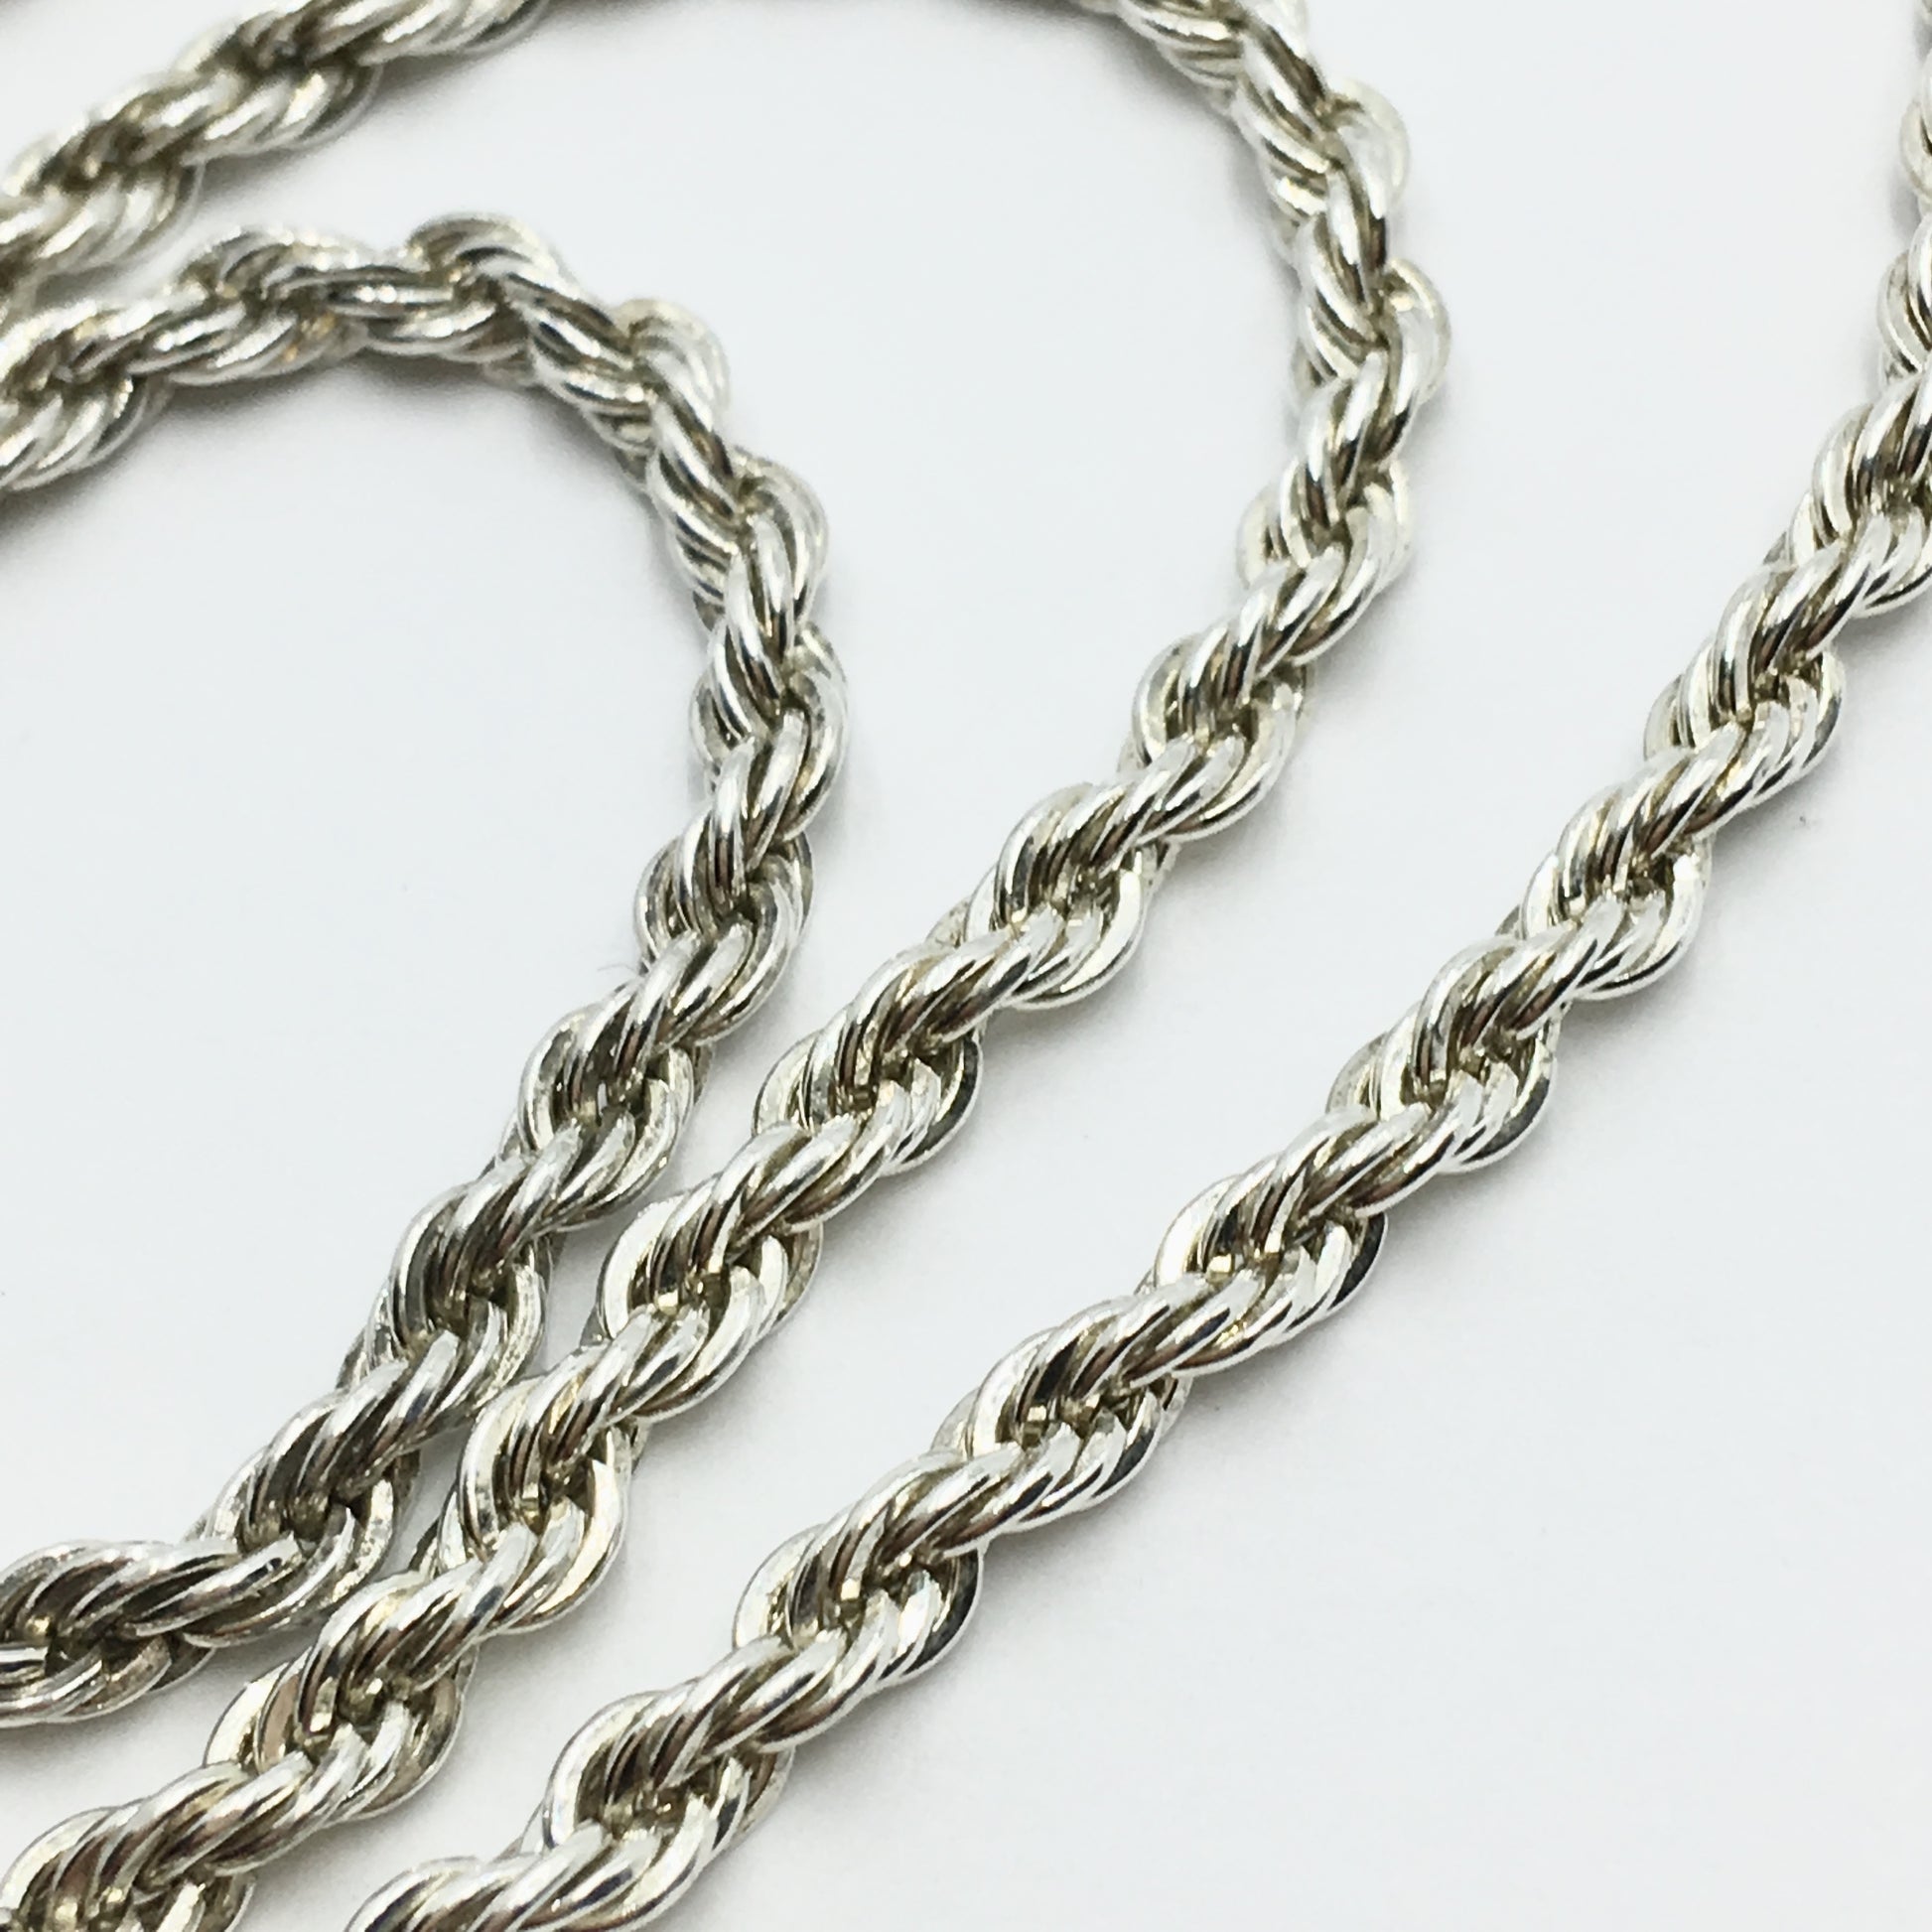 Necklace - Mens womens used 18" Sterling Silver 3mm Rope Chain Necklace 